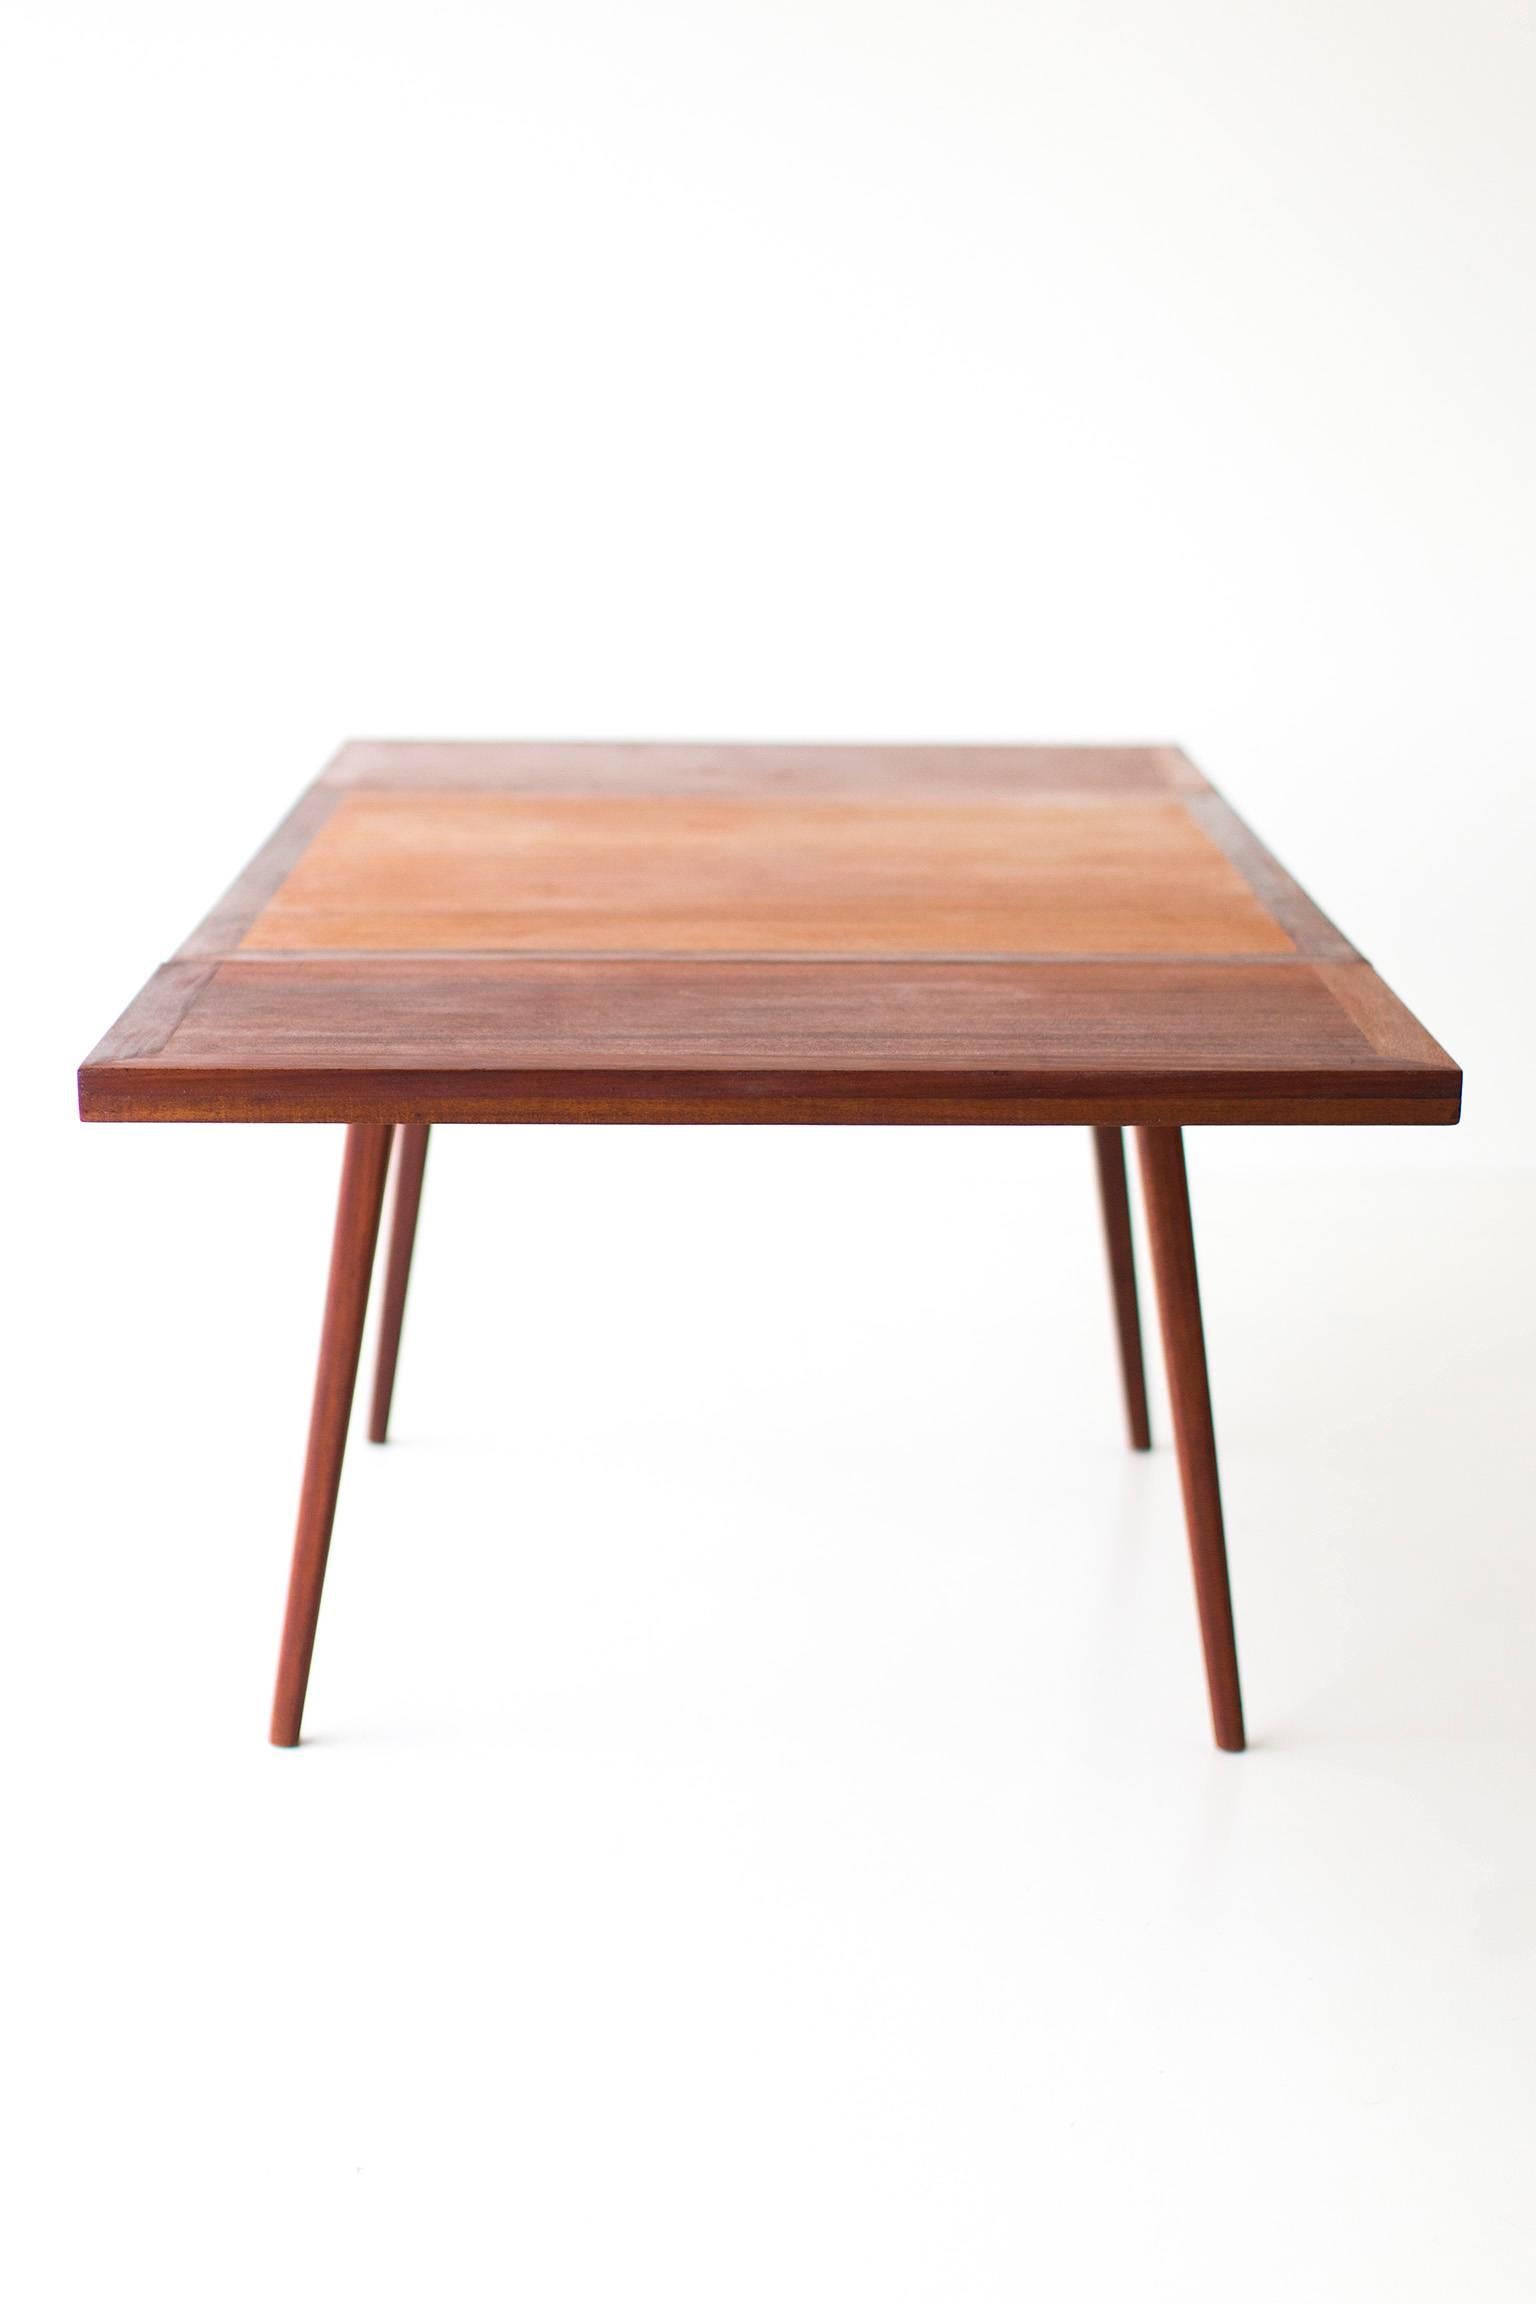 American Early Jens Risom Dining Table